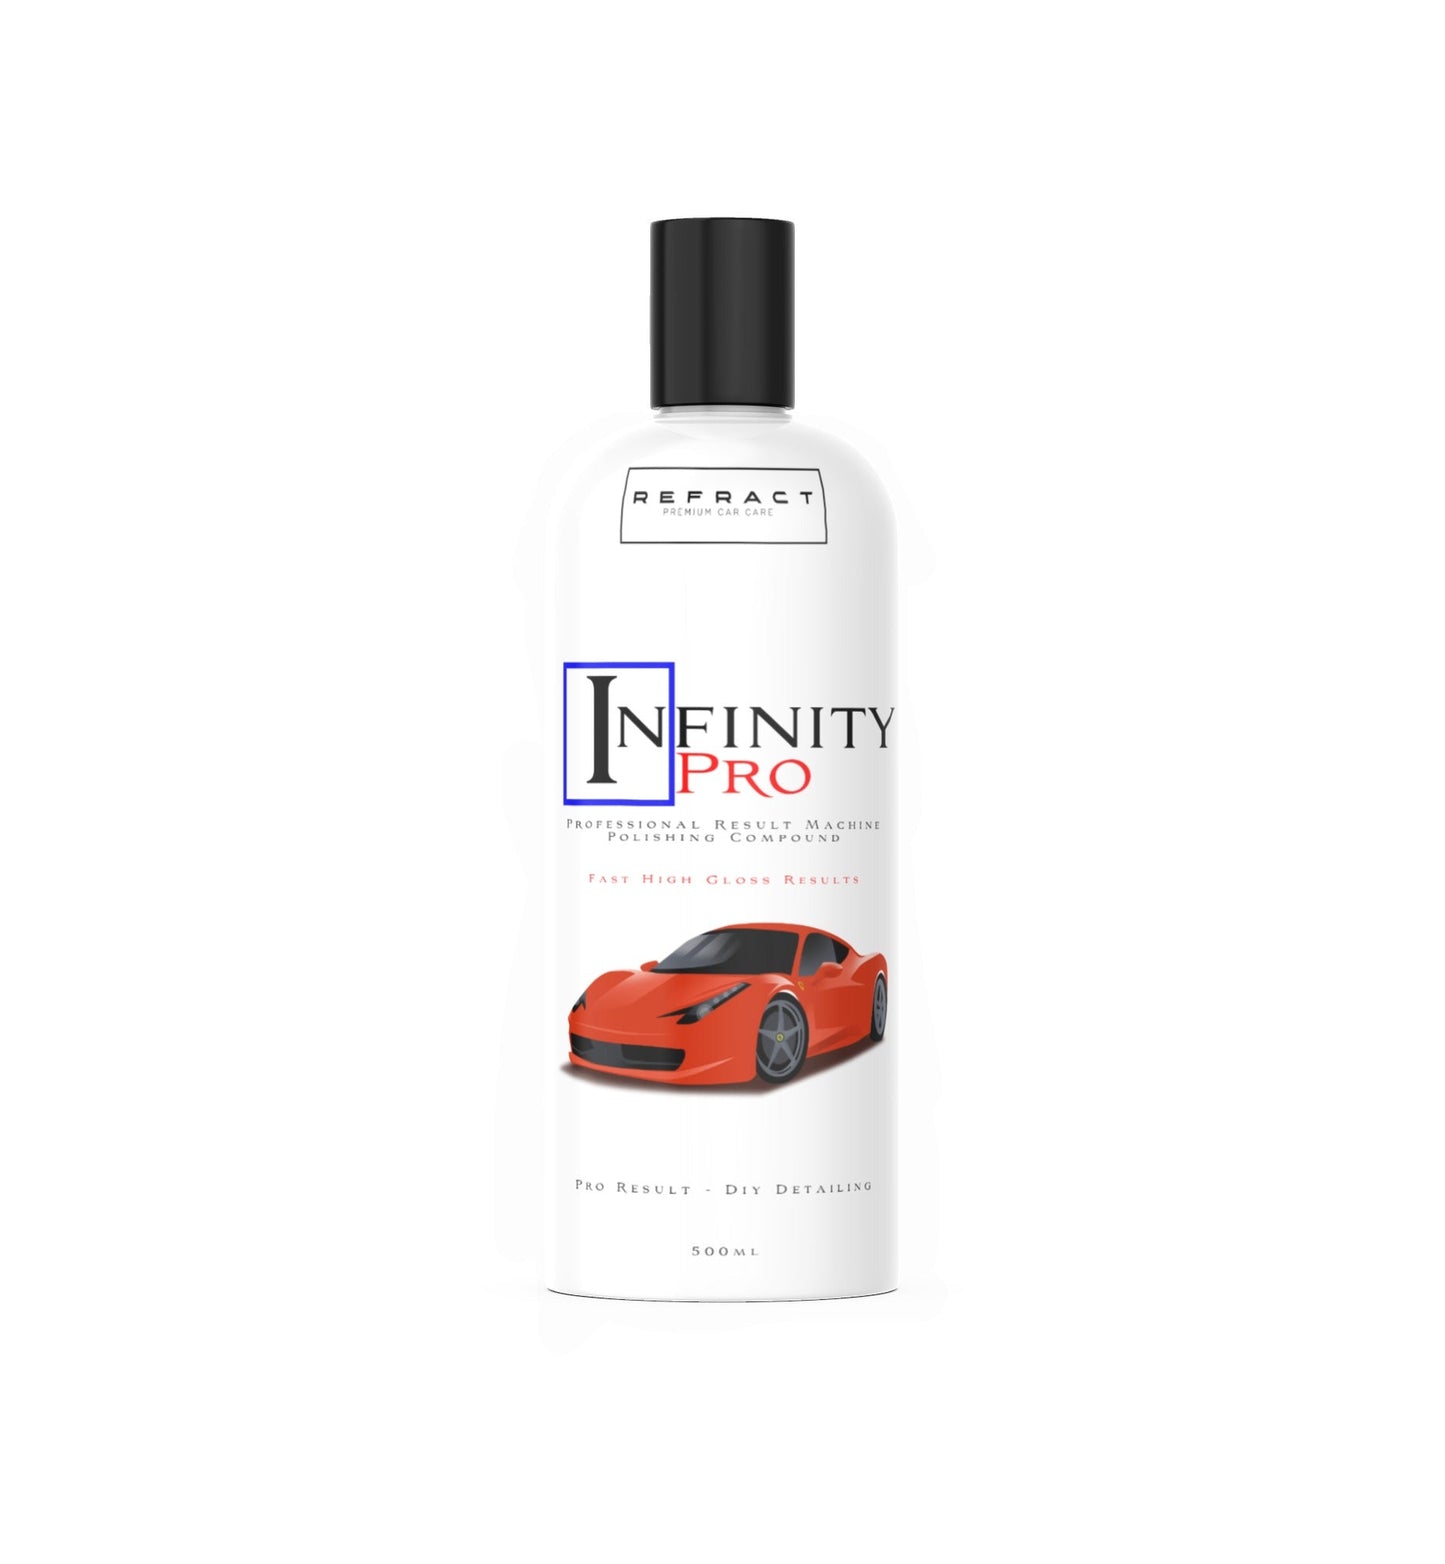 Refract Premium Car Care Products REFRACT Infinity Pro Paint Compound Polish $79.95